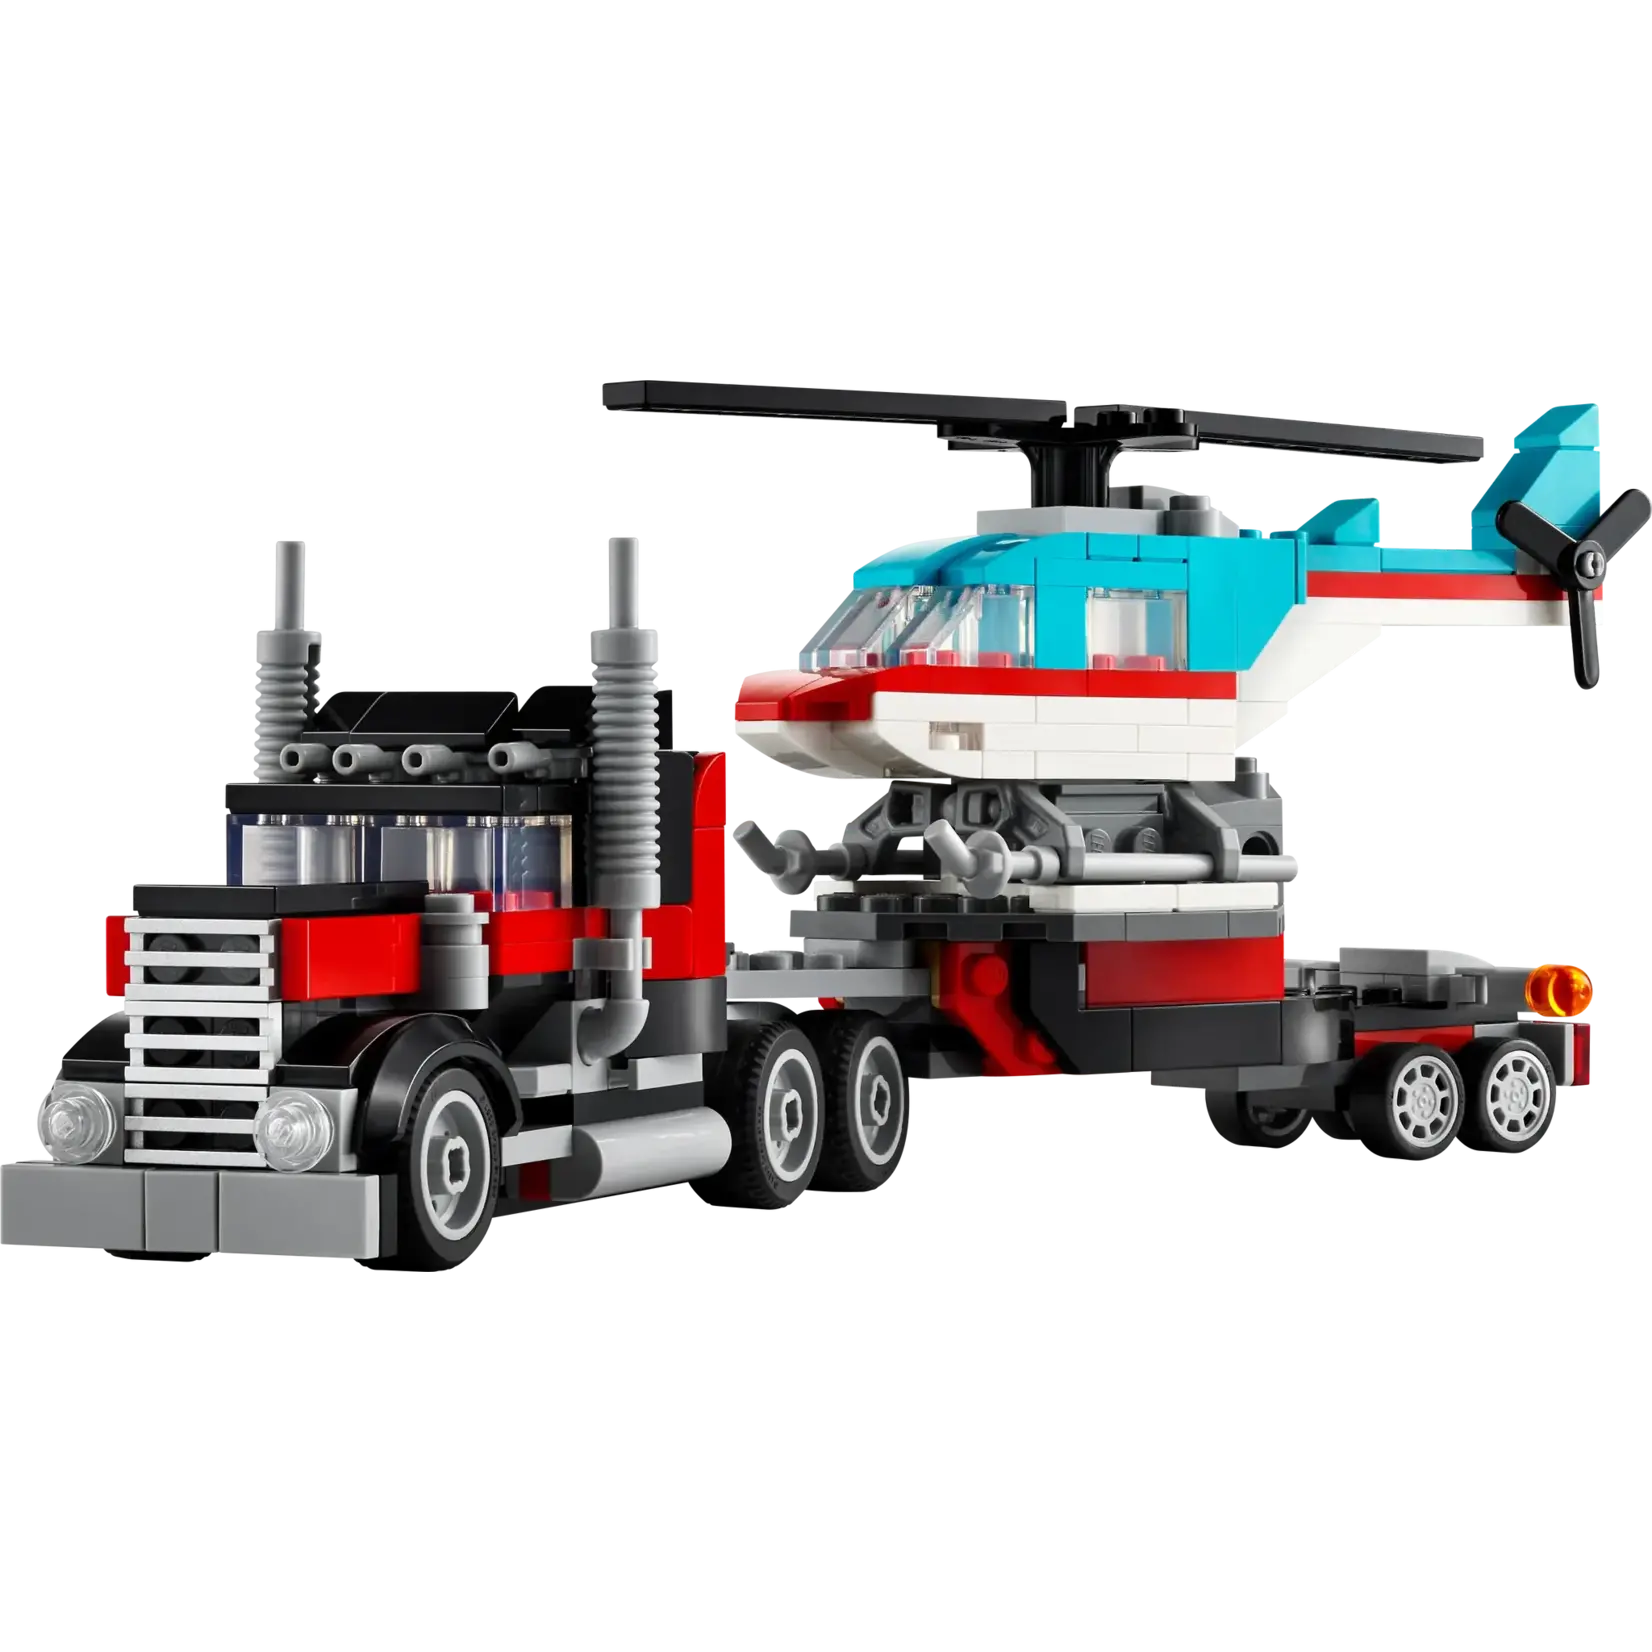 LEGO 31146 LEGO® Creator 3in1 Flatbed Truck with Helicopter